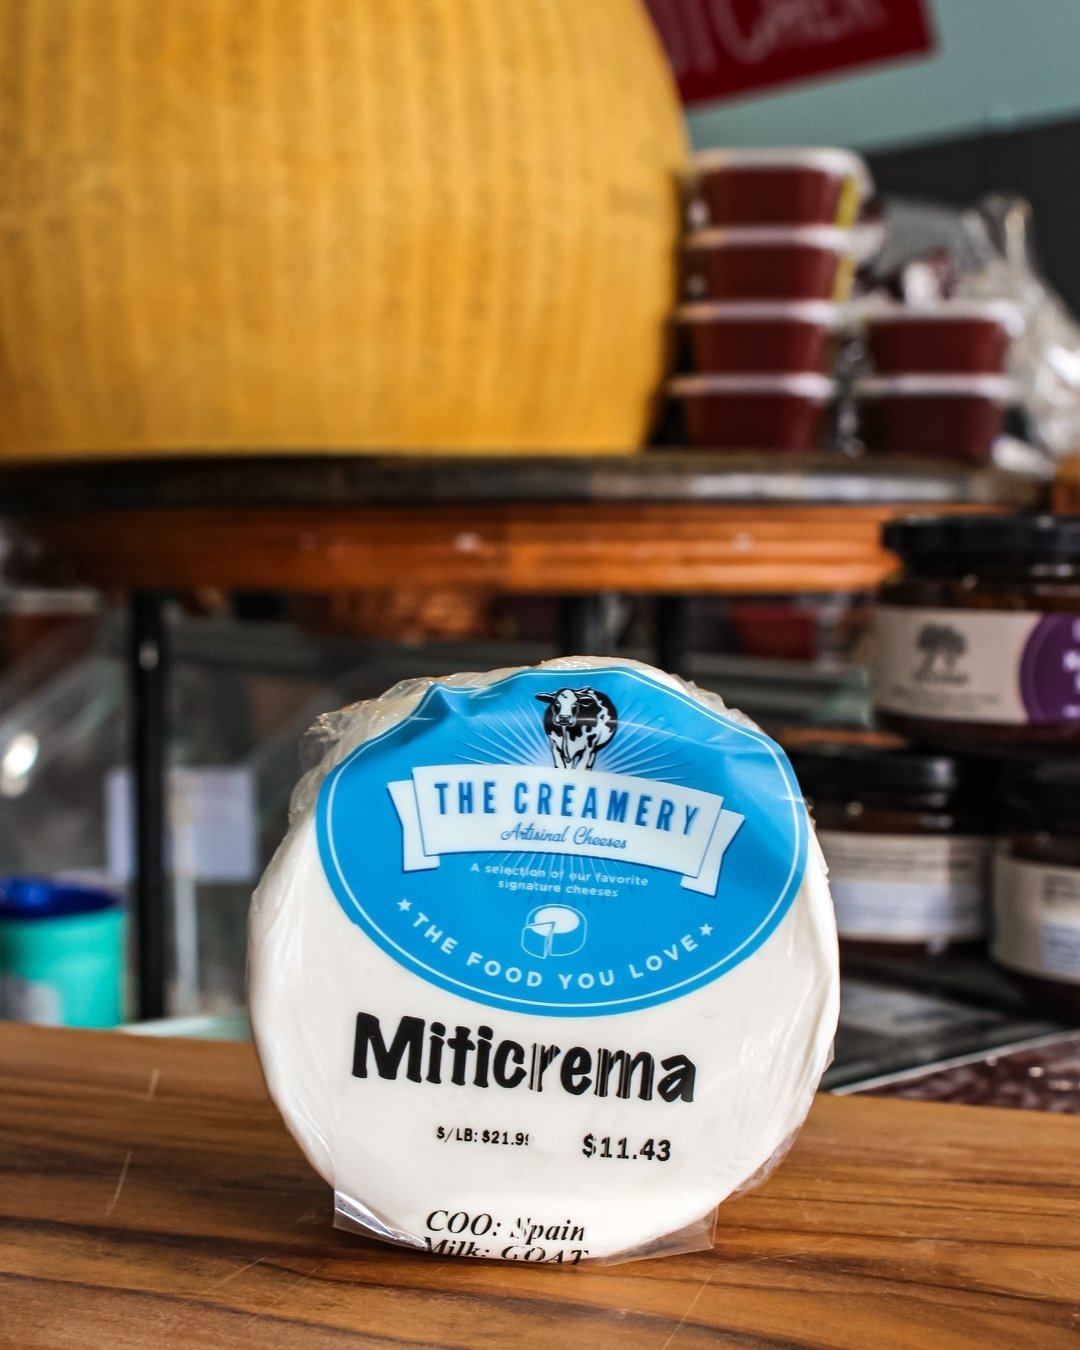 Are you a Goat Cheese lover? If so, Nico has a cheese you're gonna love this week. 

Meet Miticrema - a Spanish goat cheese filled to the brim with flavor. 

#cheeseplease